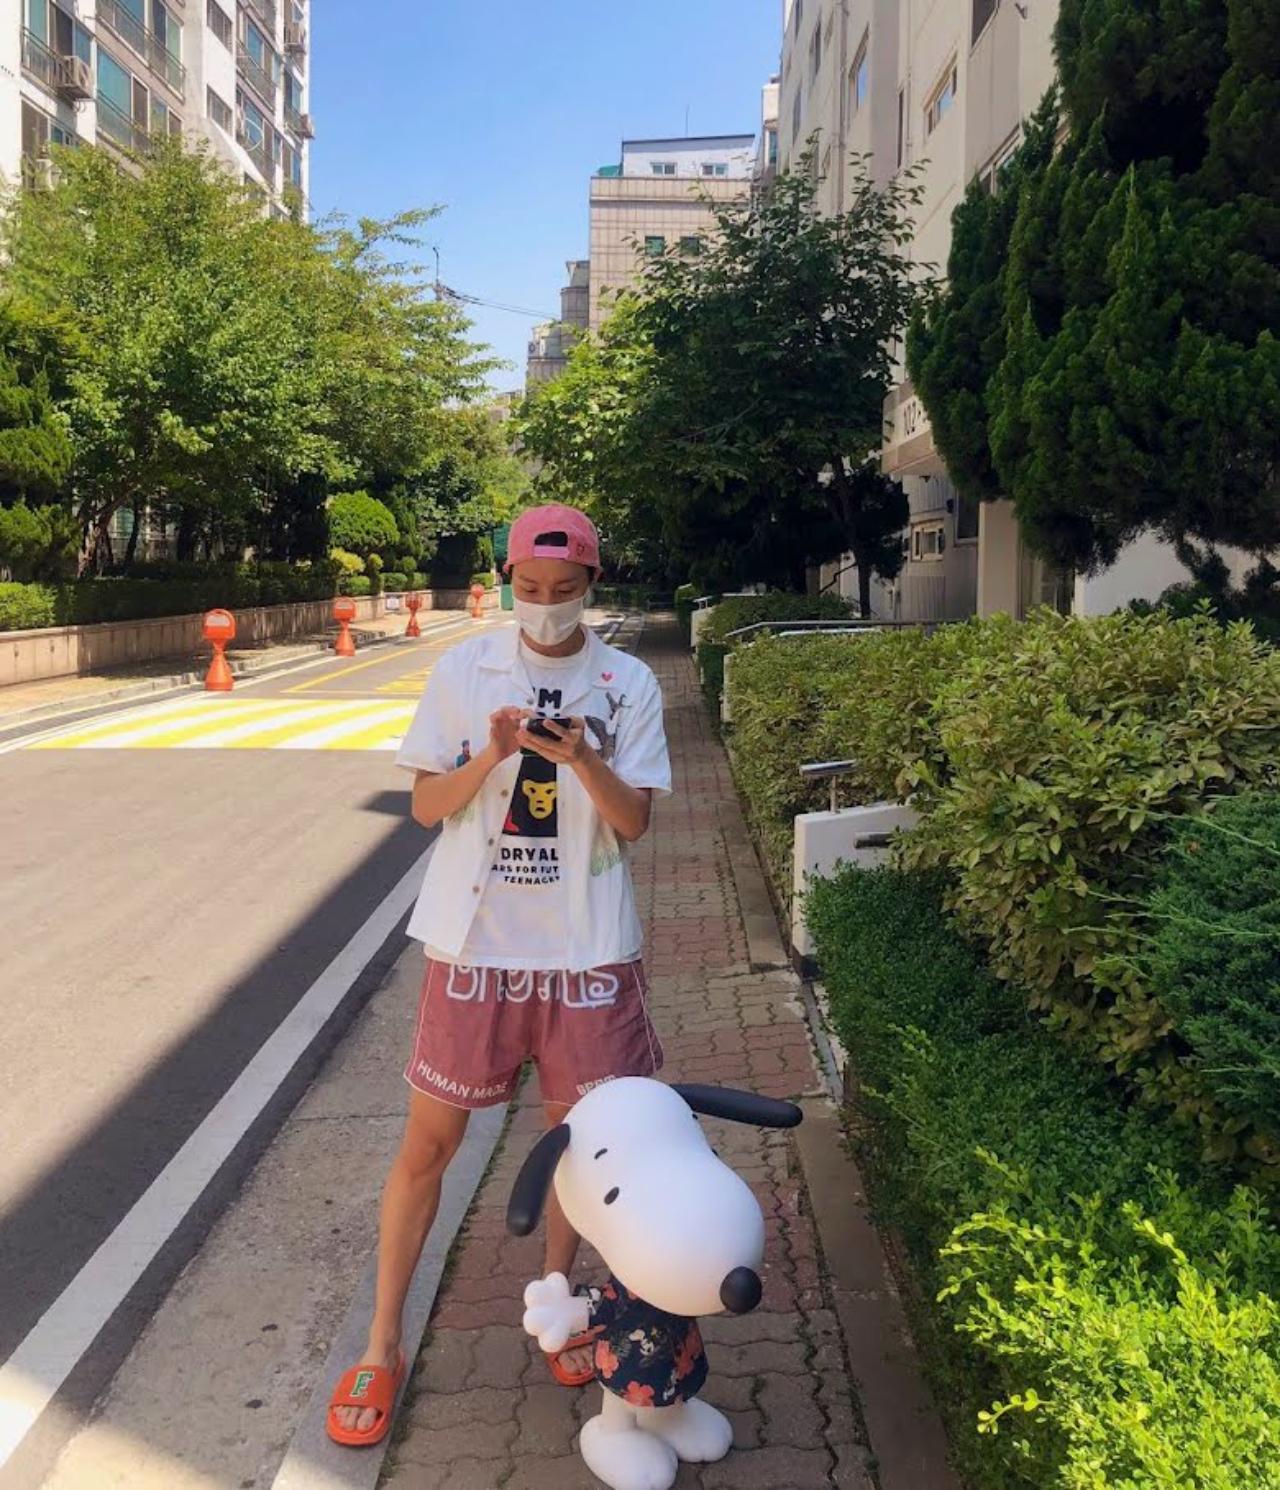 Summertime J-Hope means it's time to choose the most lightweight and comfortable outfits from his wadrobe. J-Hope flaunted a sporty look with his cap, jacket and sandals